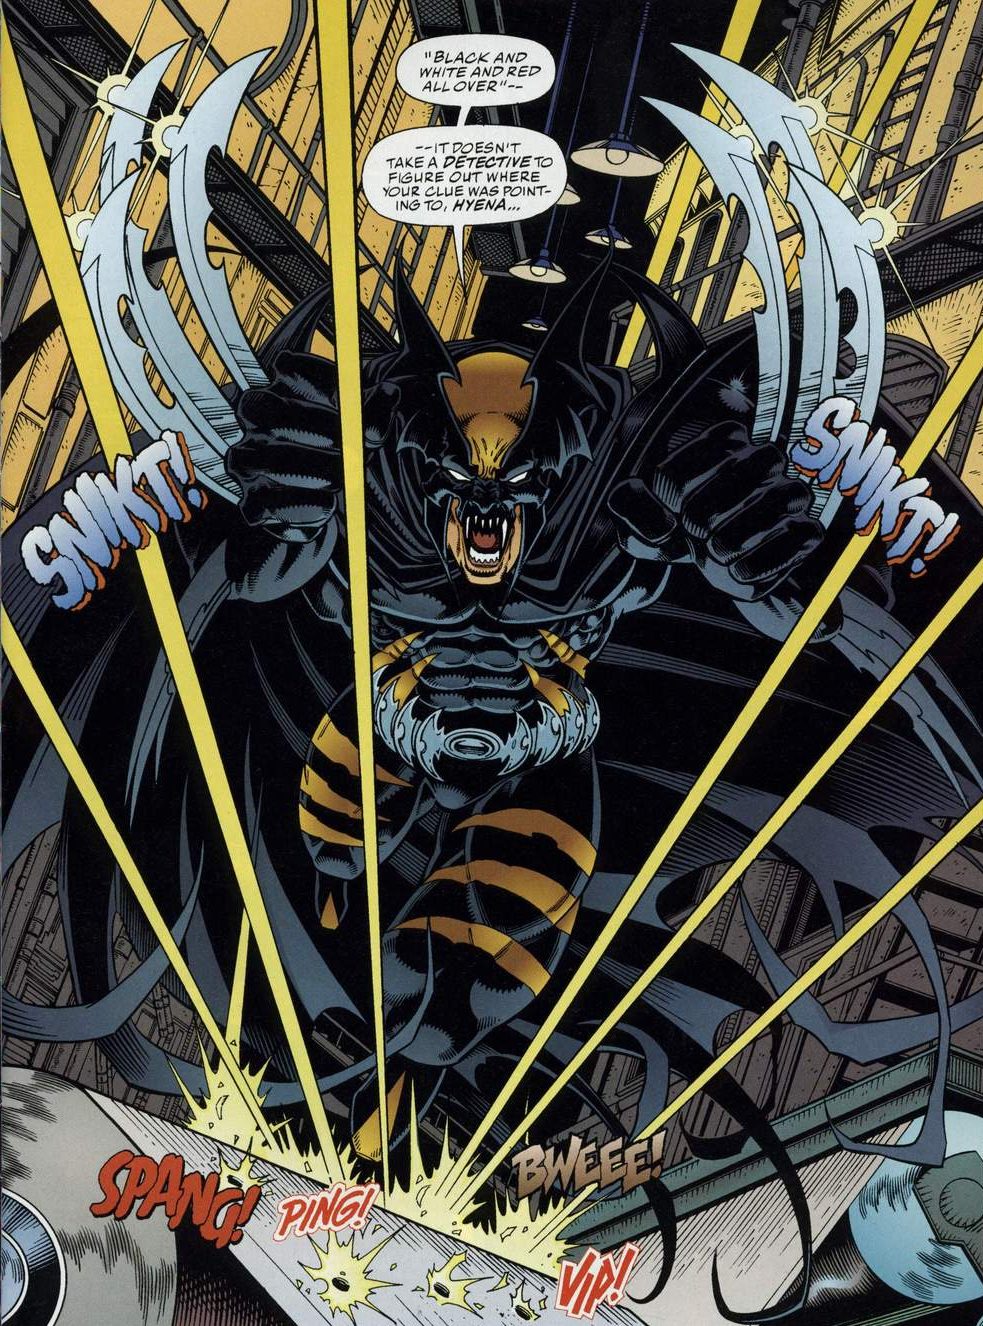 Dark Claw lunges into action in Legends of the Dark Claw Vol. 1 #1 "Through a Glass Darkly" (1996), Marvel Comics/DC. Words by Larry Hama, art by Jim Balent, Ray McCarthy, Pat Garrahy, and Bill Oakley.